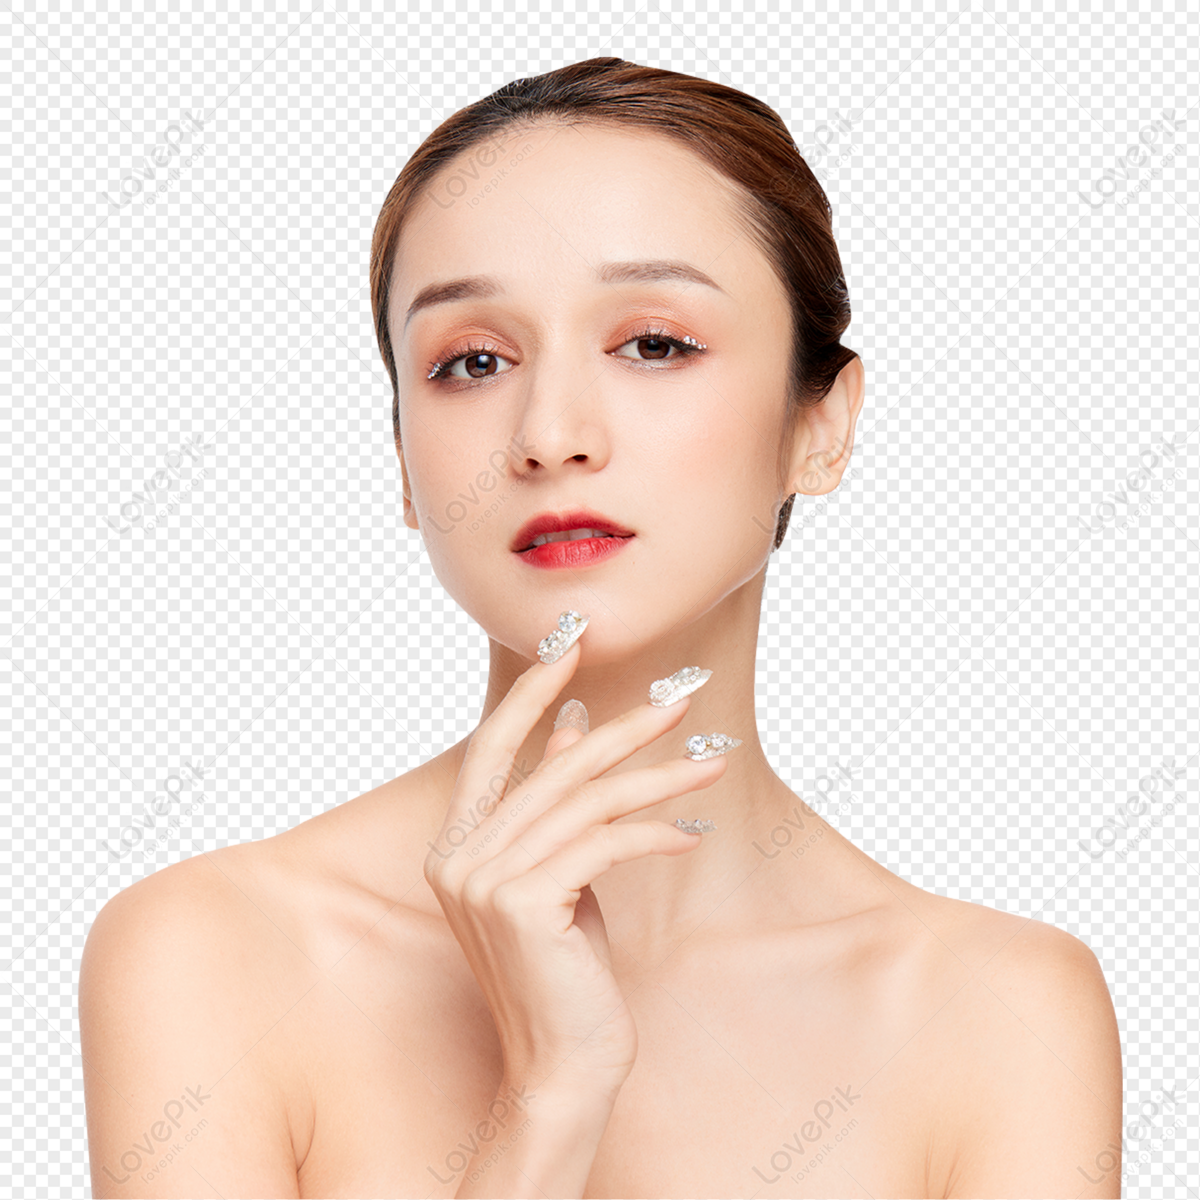 modelportrait-png-images-with-transparent-background-free-download-on